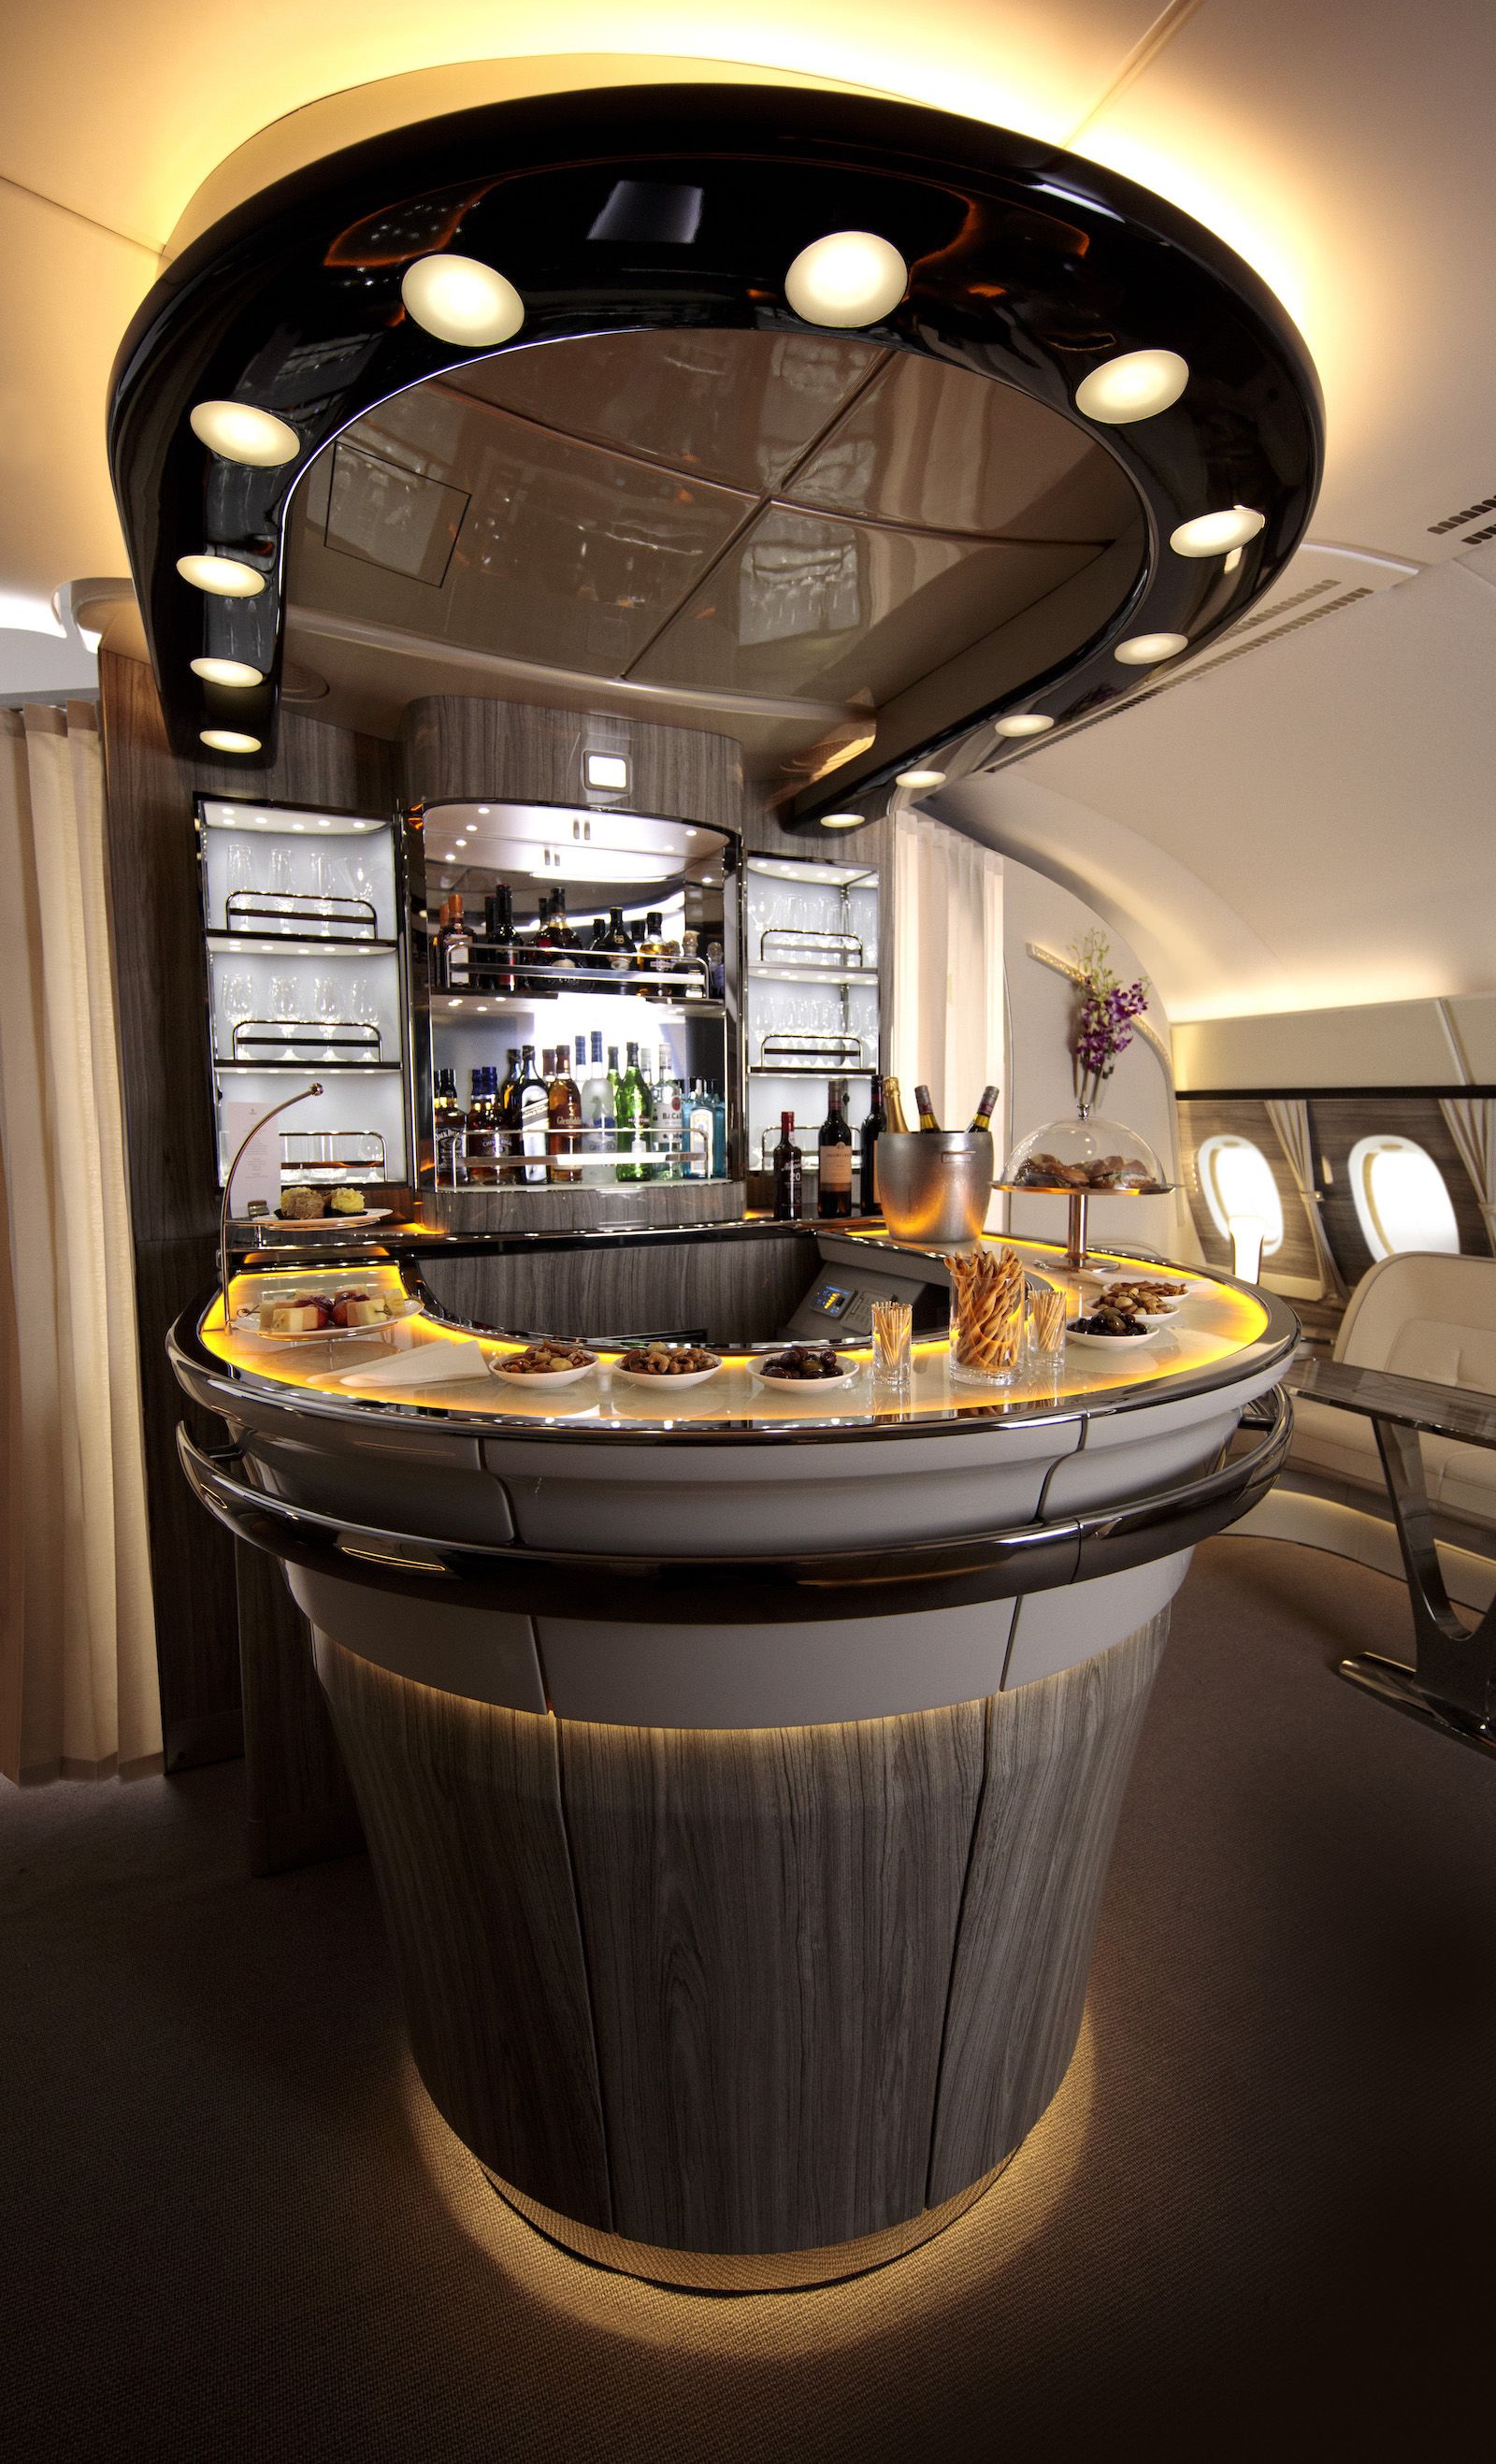 Emirates' next generation A380 Onboard Lounge, inspired by private yacht cabins.